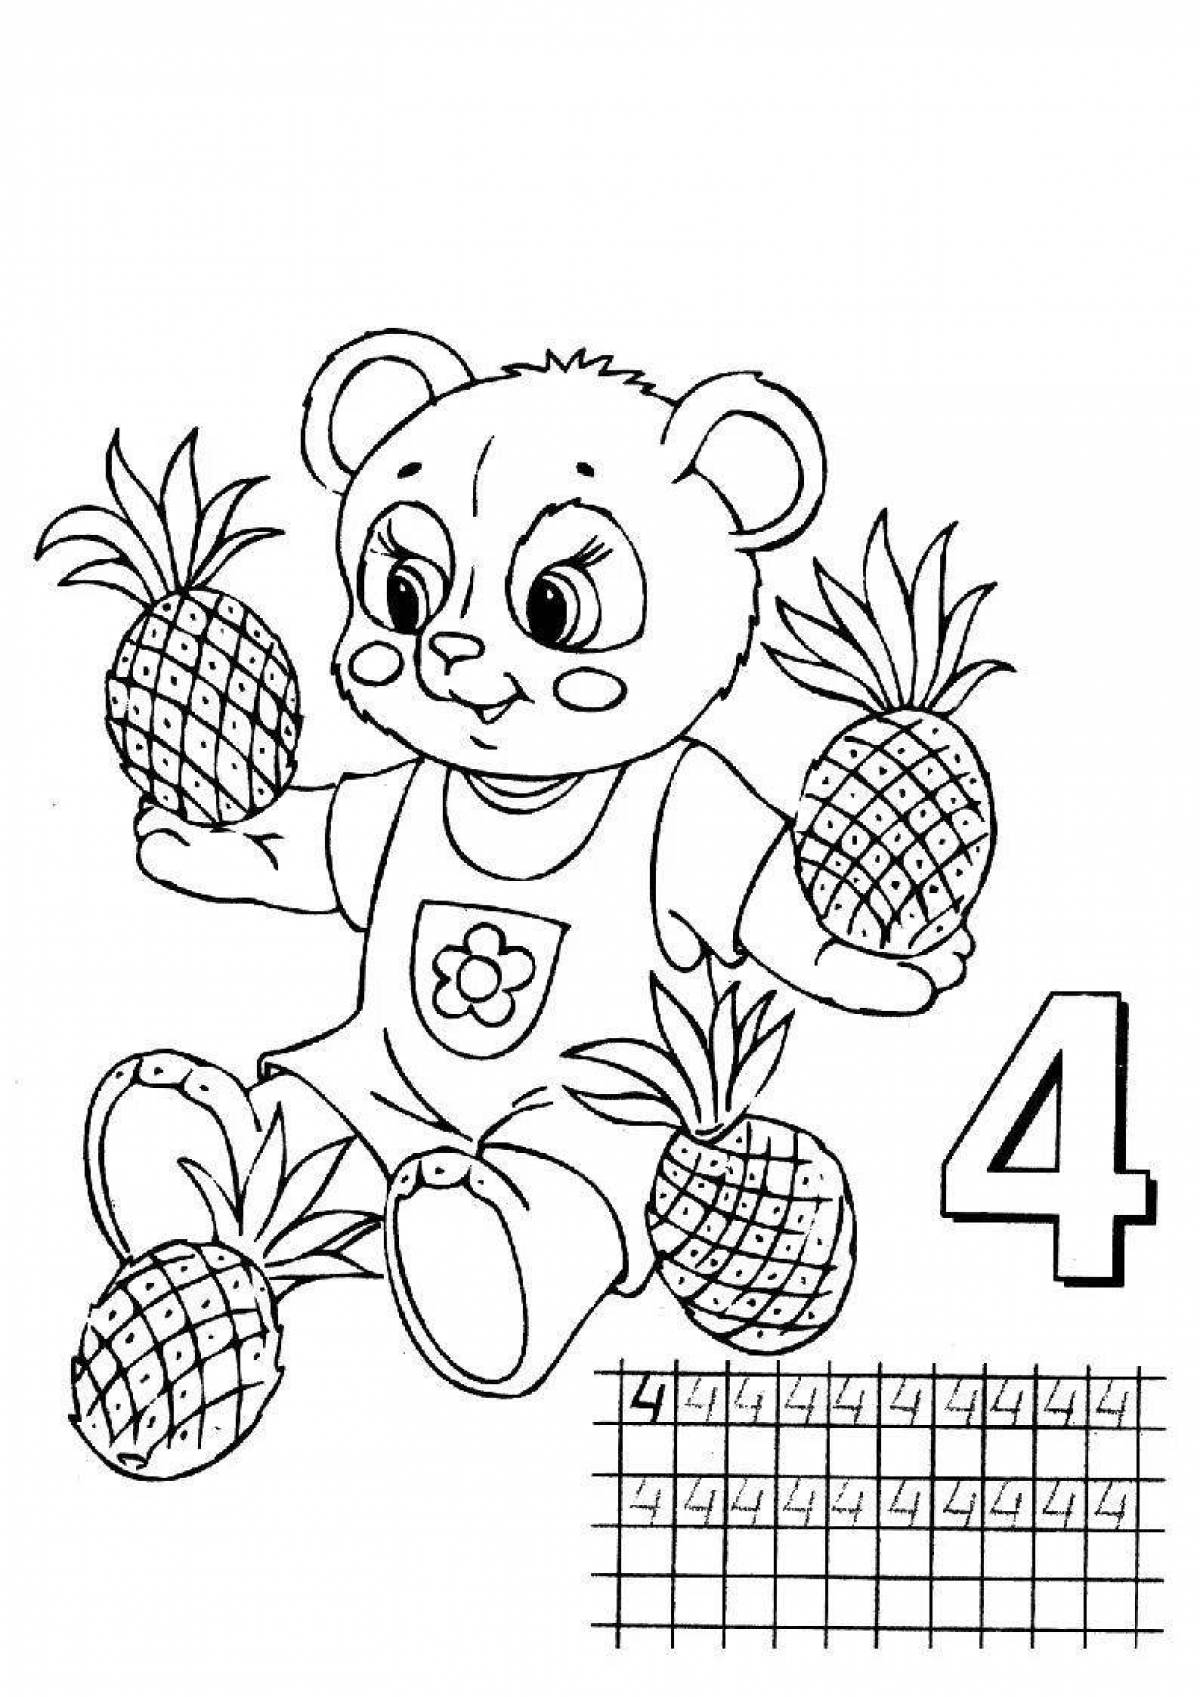 Delightful coloring book learning numbers